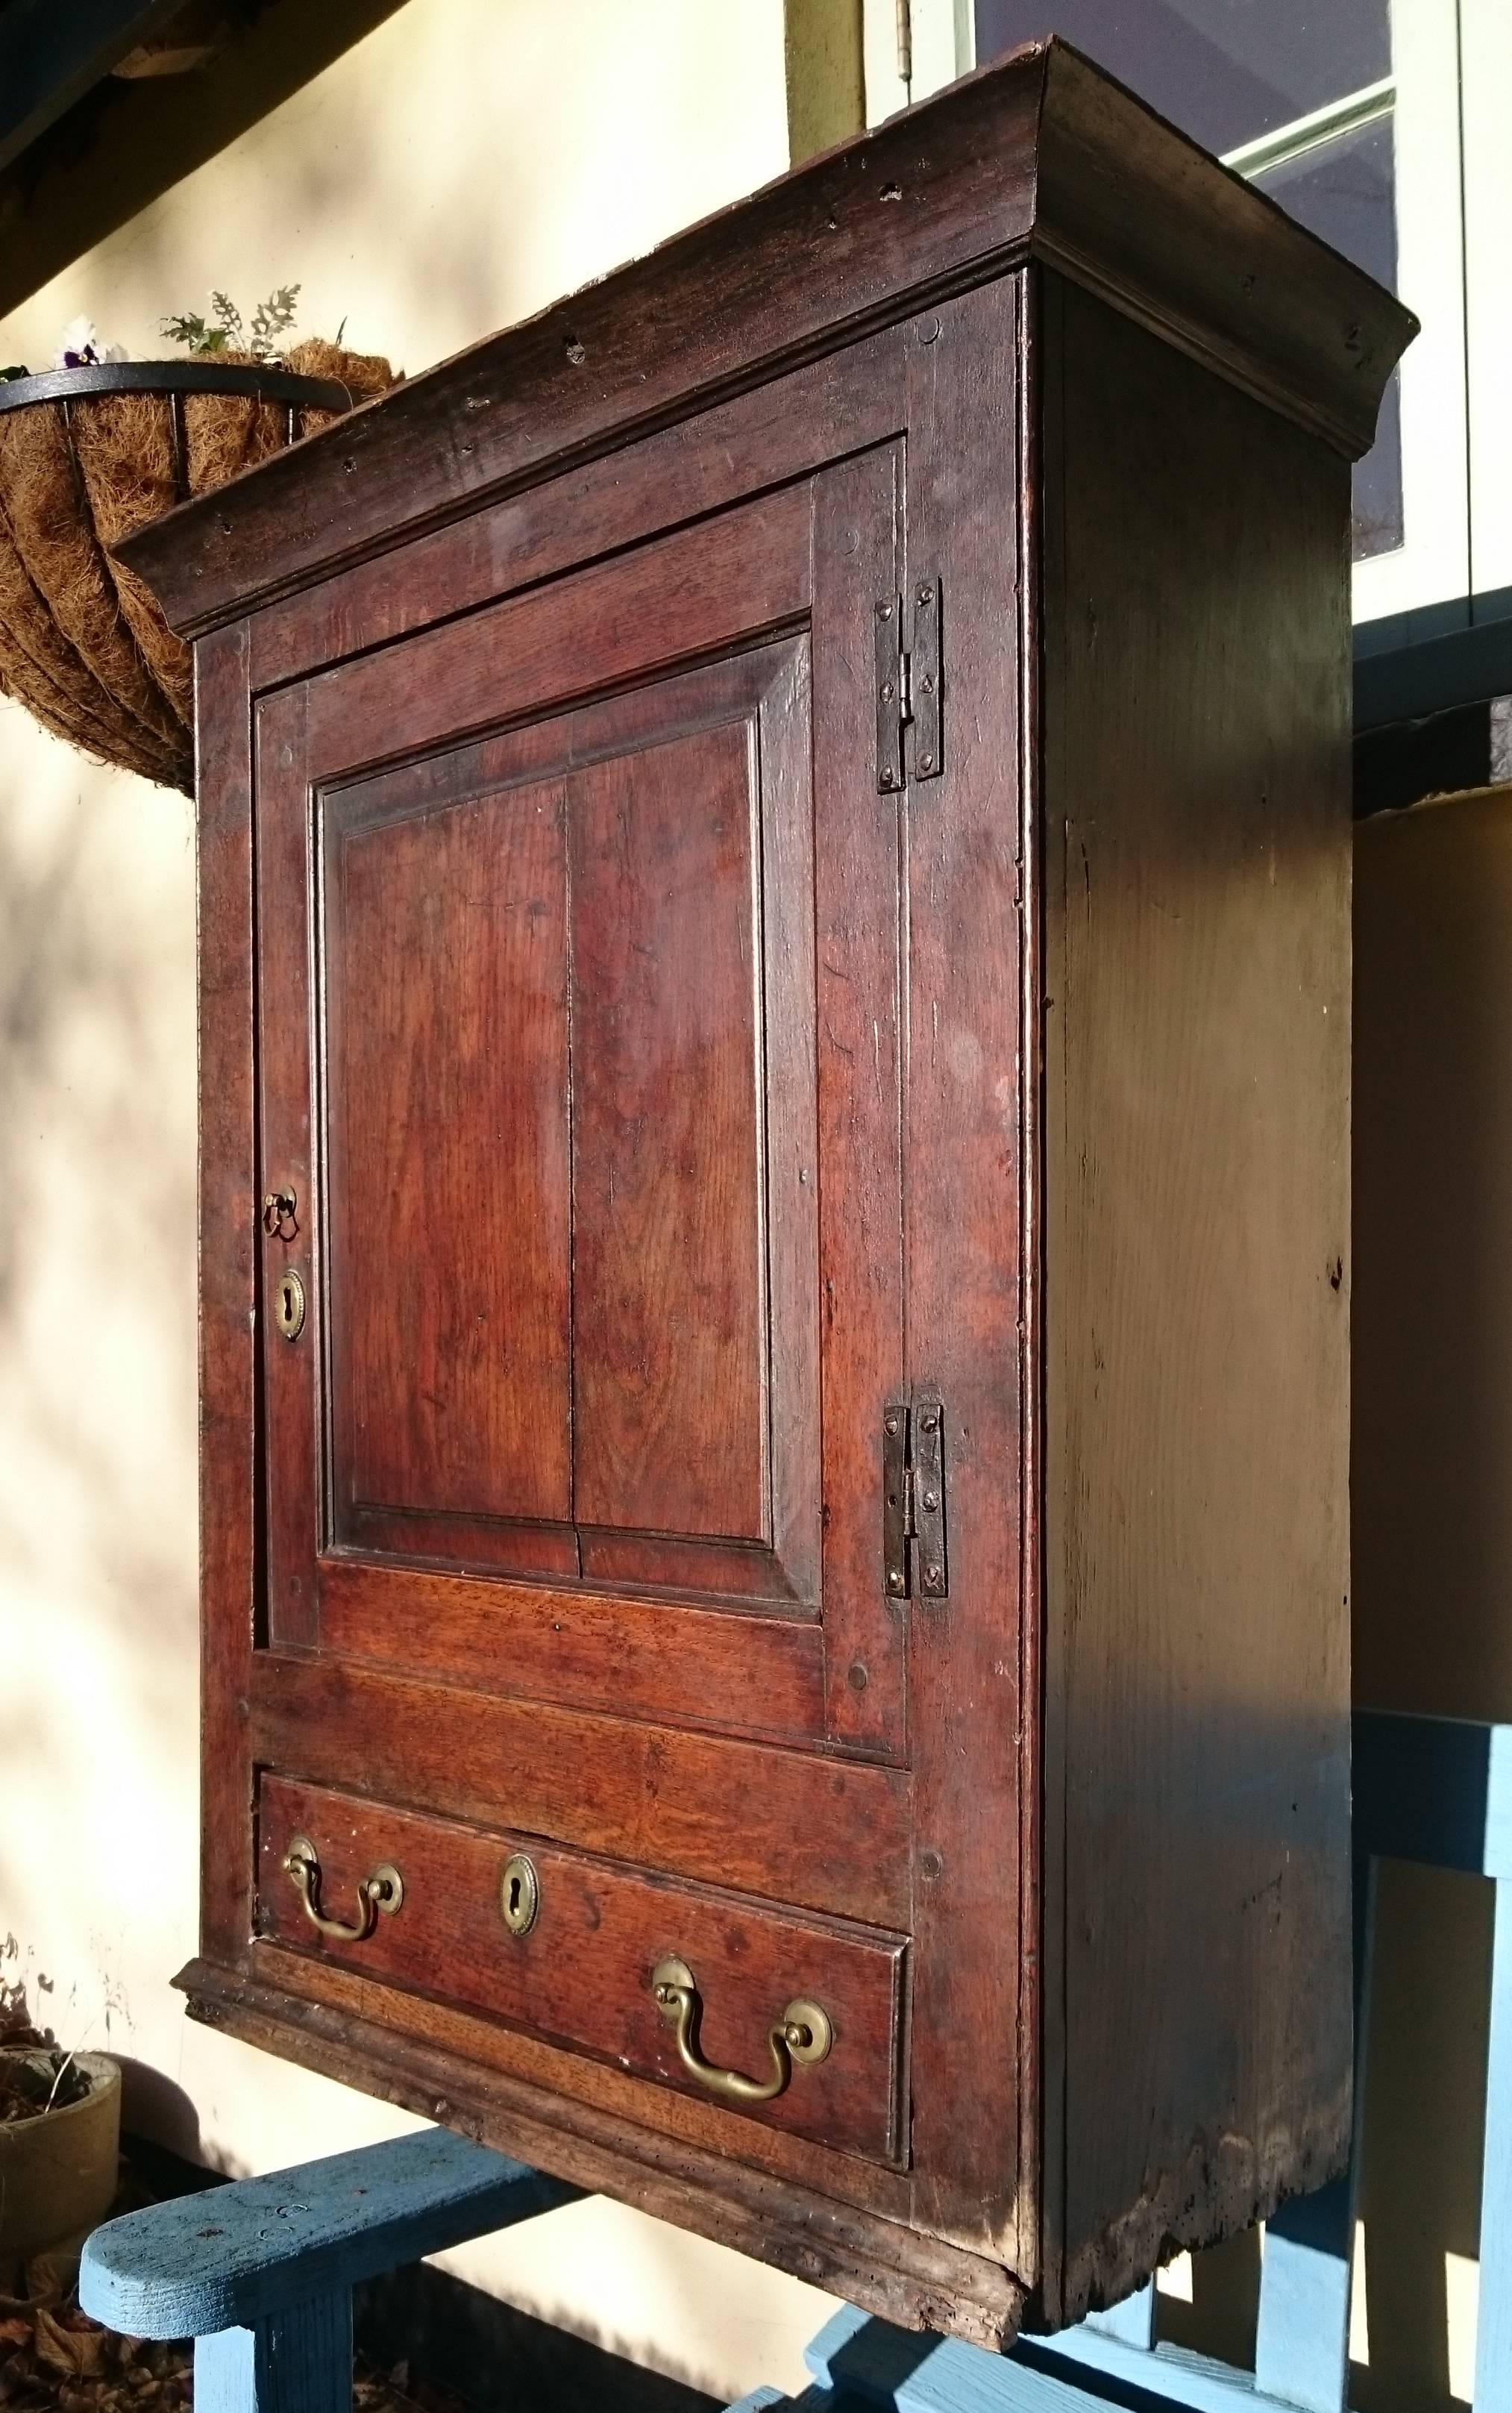 18th century George II period oak antique hanging cupboard. This charming cupboard has attained a wonderful deep color and patina over its two hundred and eighty years.

English, circa 1740 

Measure: 69cm / 27